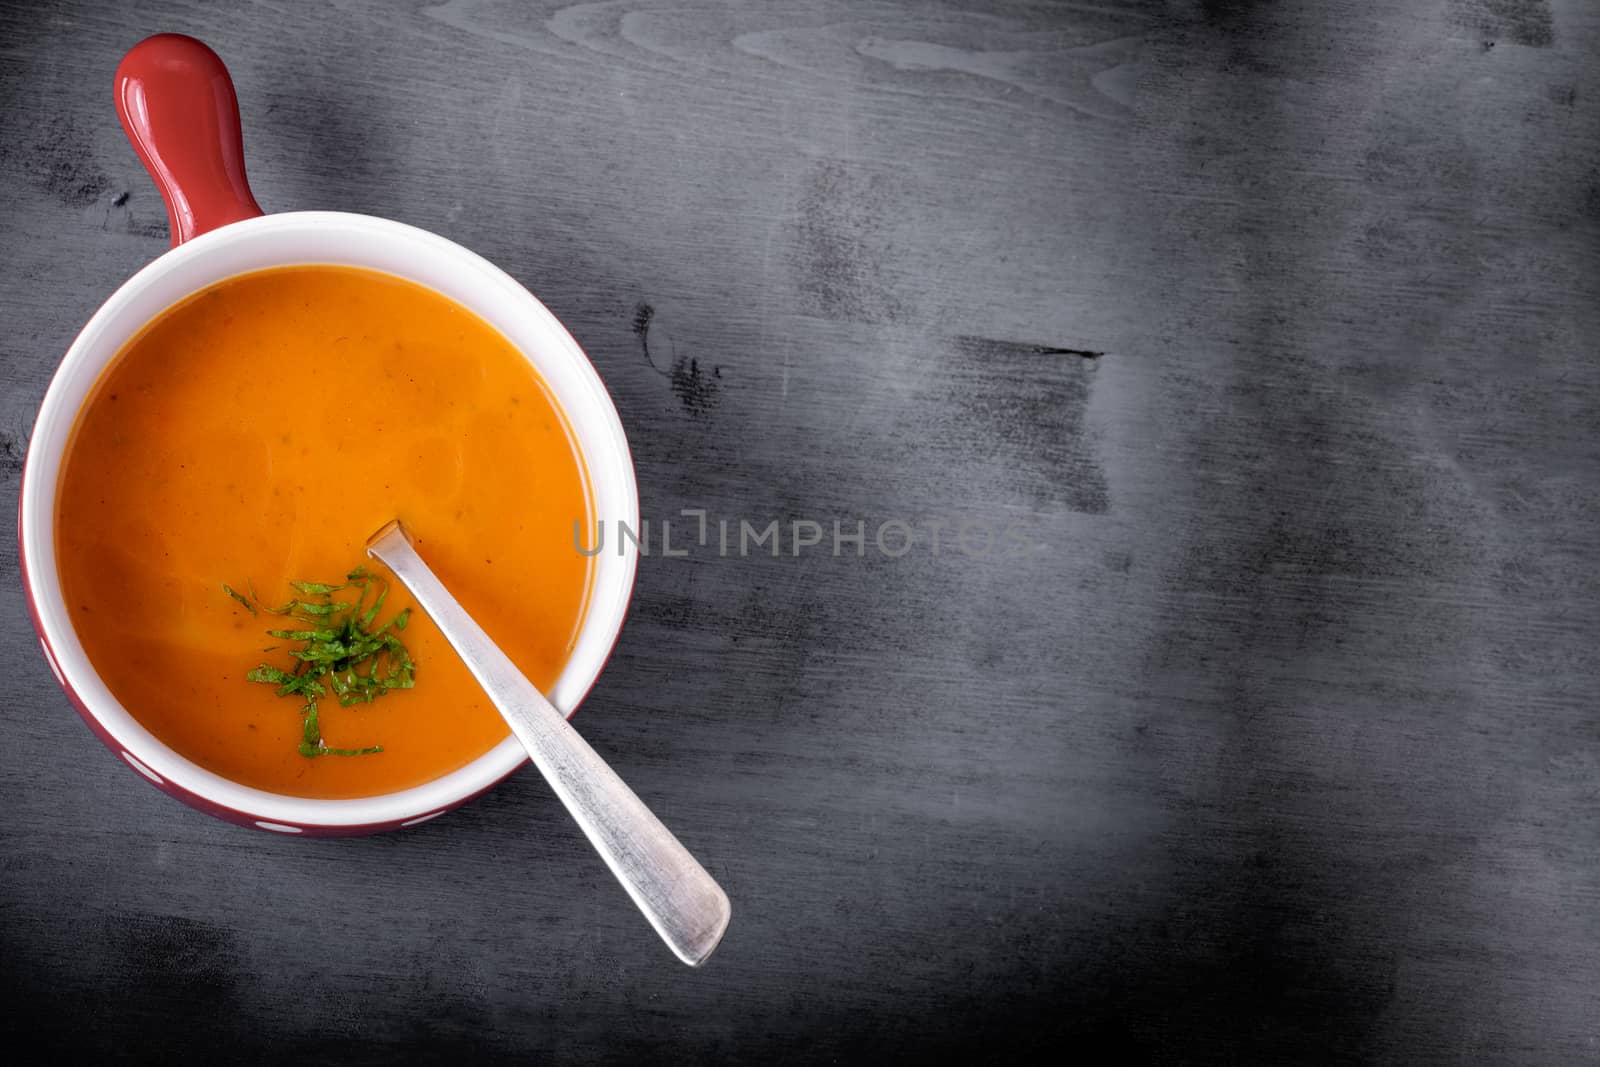 Pumpkin creme soup with a spoon served on a table